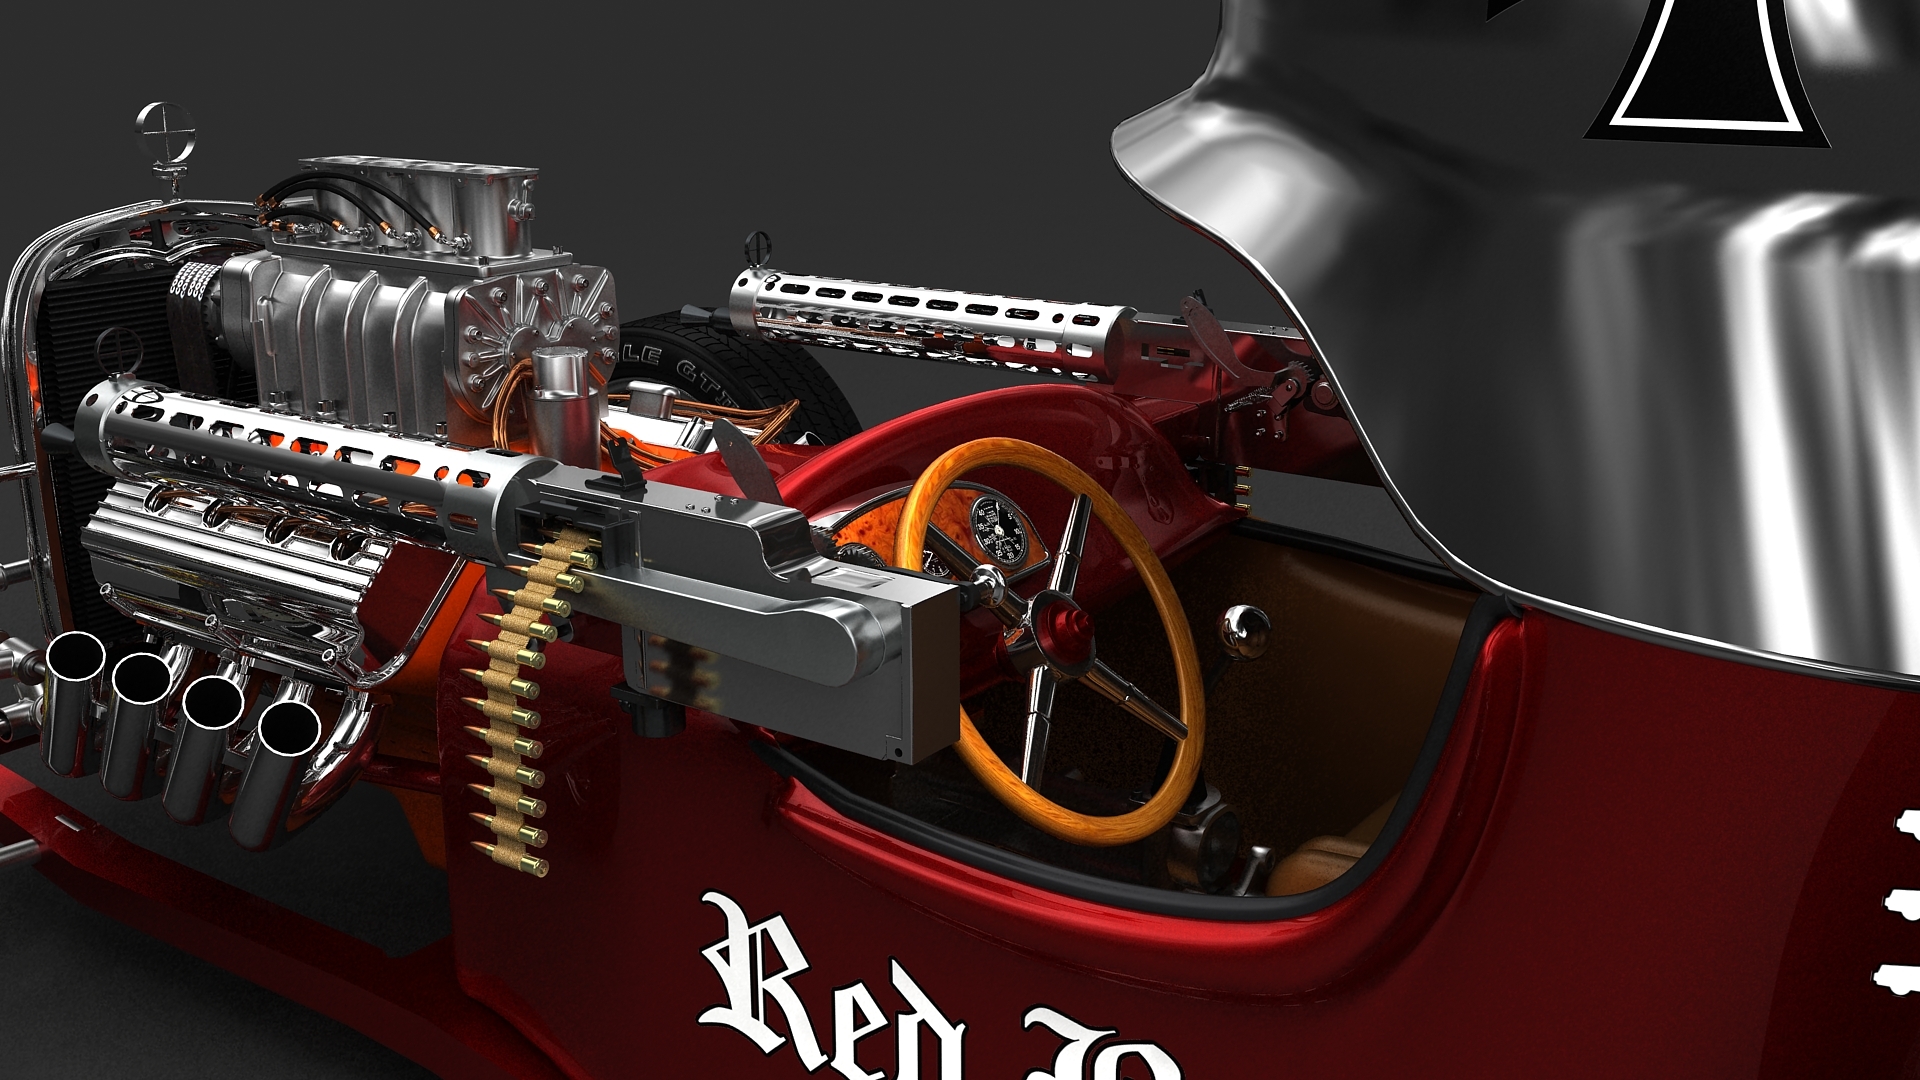 3D Red Baron Hot Rod